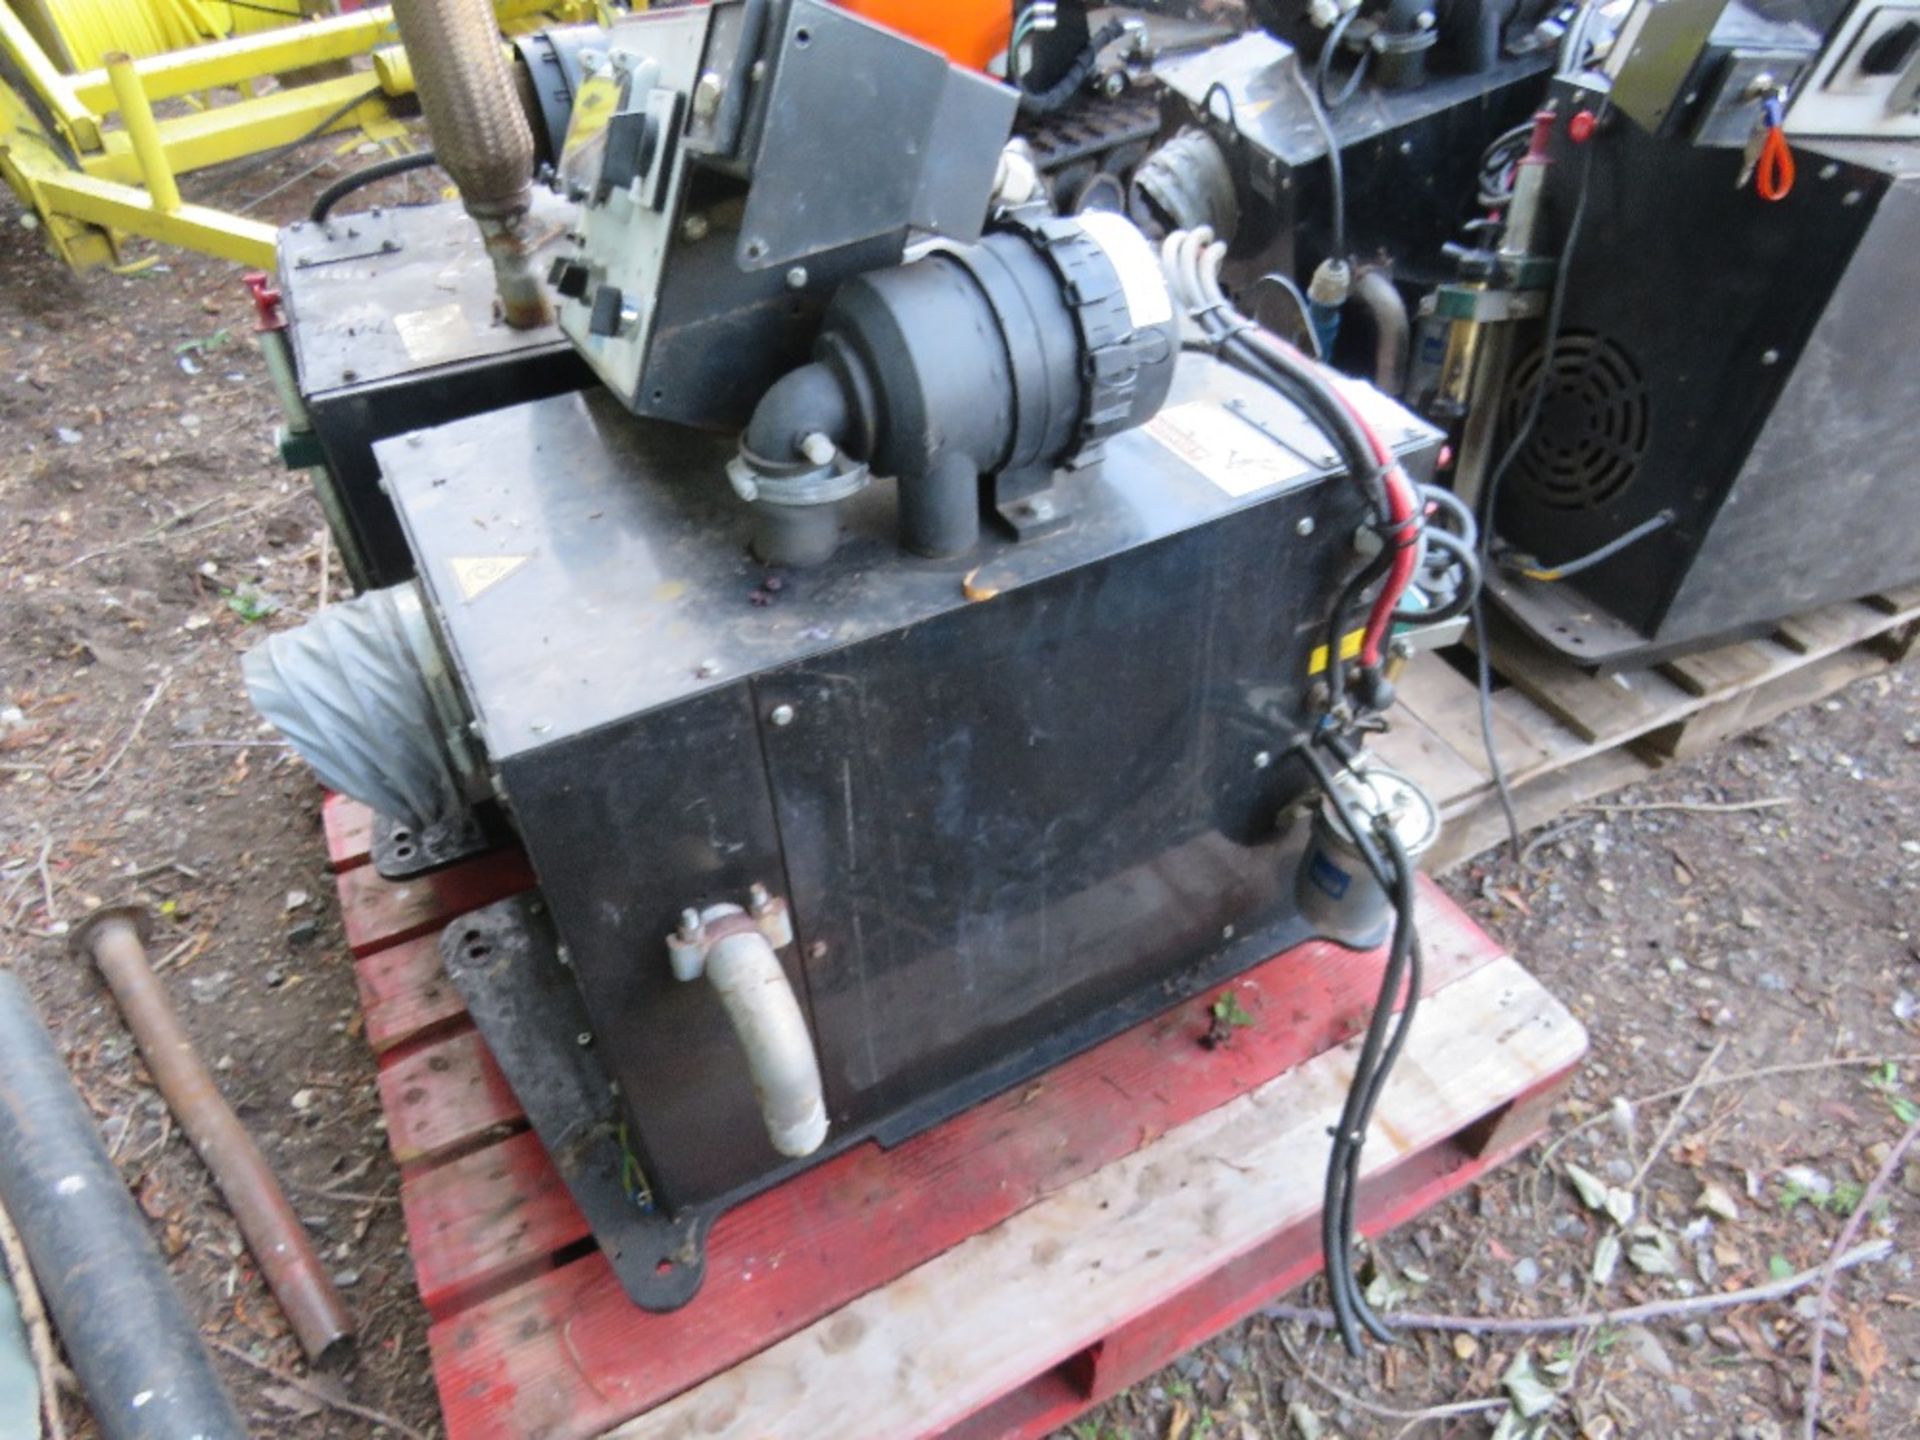 2 X HATZ DIESEL ENGINED GENERATOR SETS, 3.1KW OUTPUT. EX LIGHTING TOWERS. - Image 2 of 5